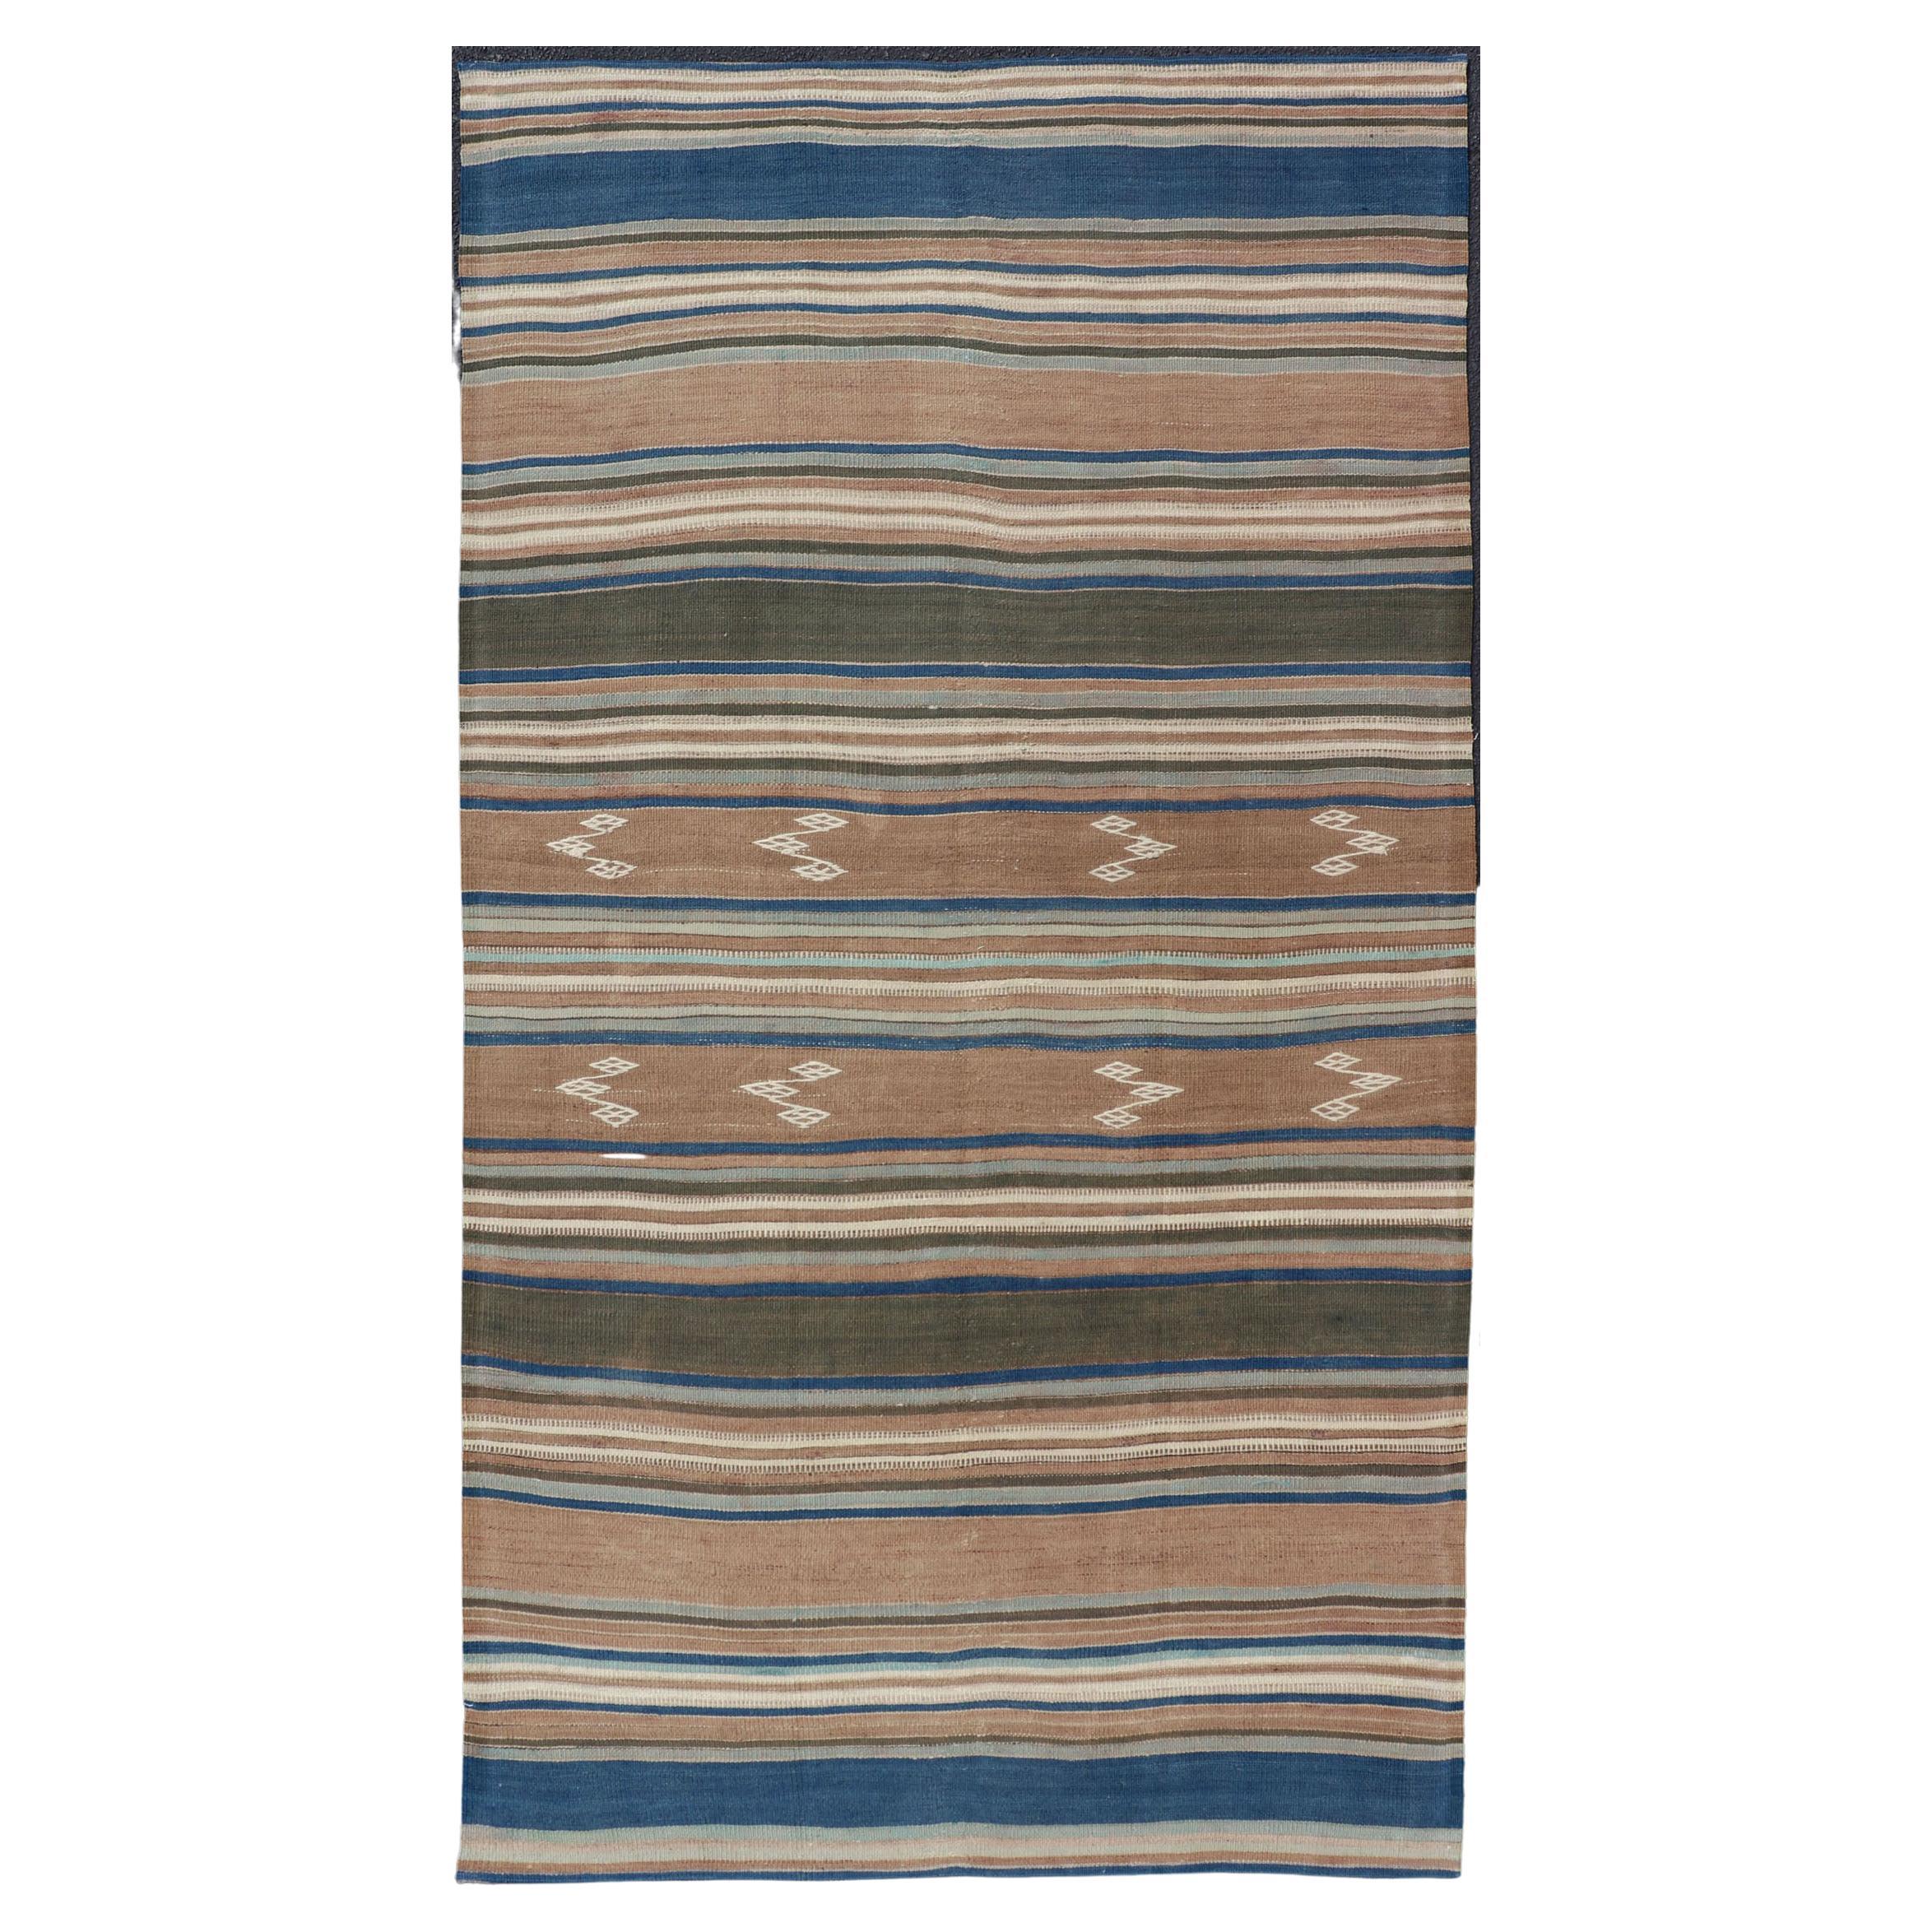 Vintage Turkish Flat-Weave Kilim with Blue's, Brown, & Taupe in Striped Design